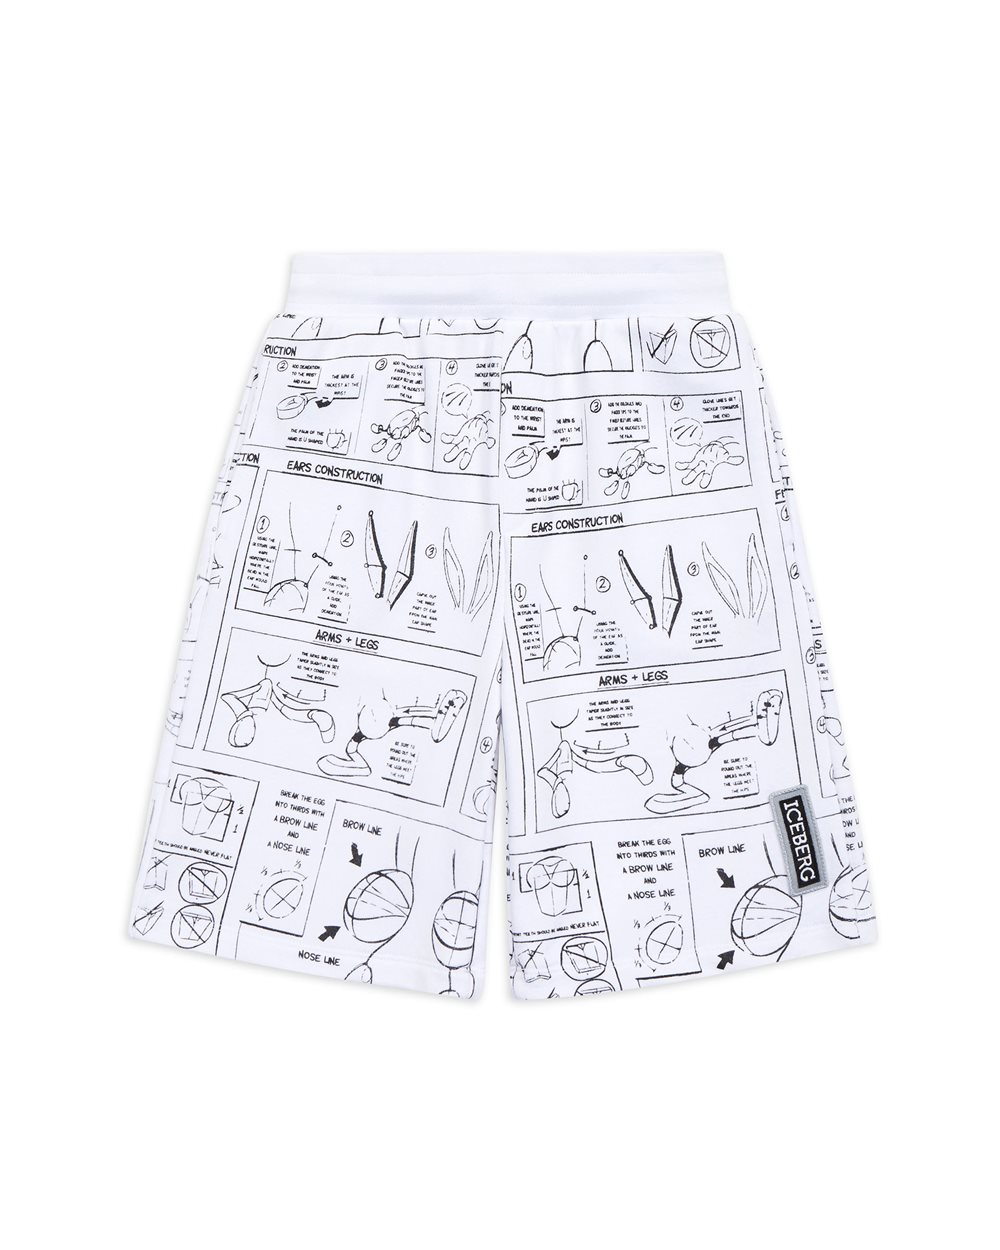 Shorts with cartoon graphics and logo - Kids | Iceberg - Official Website